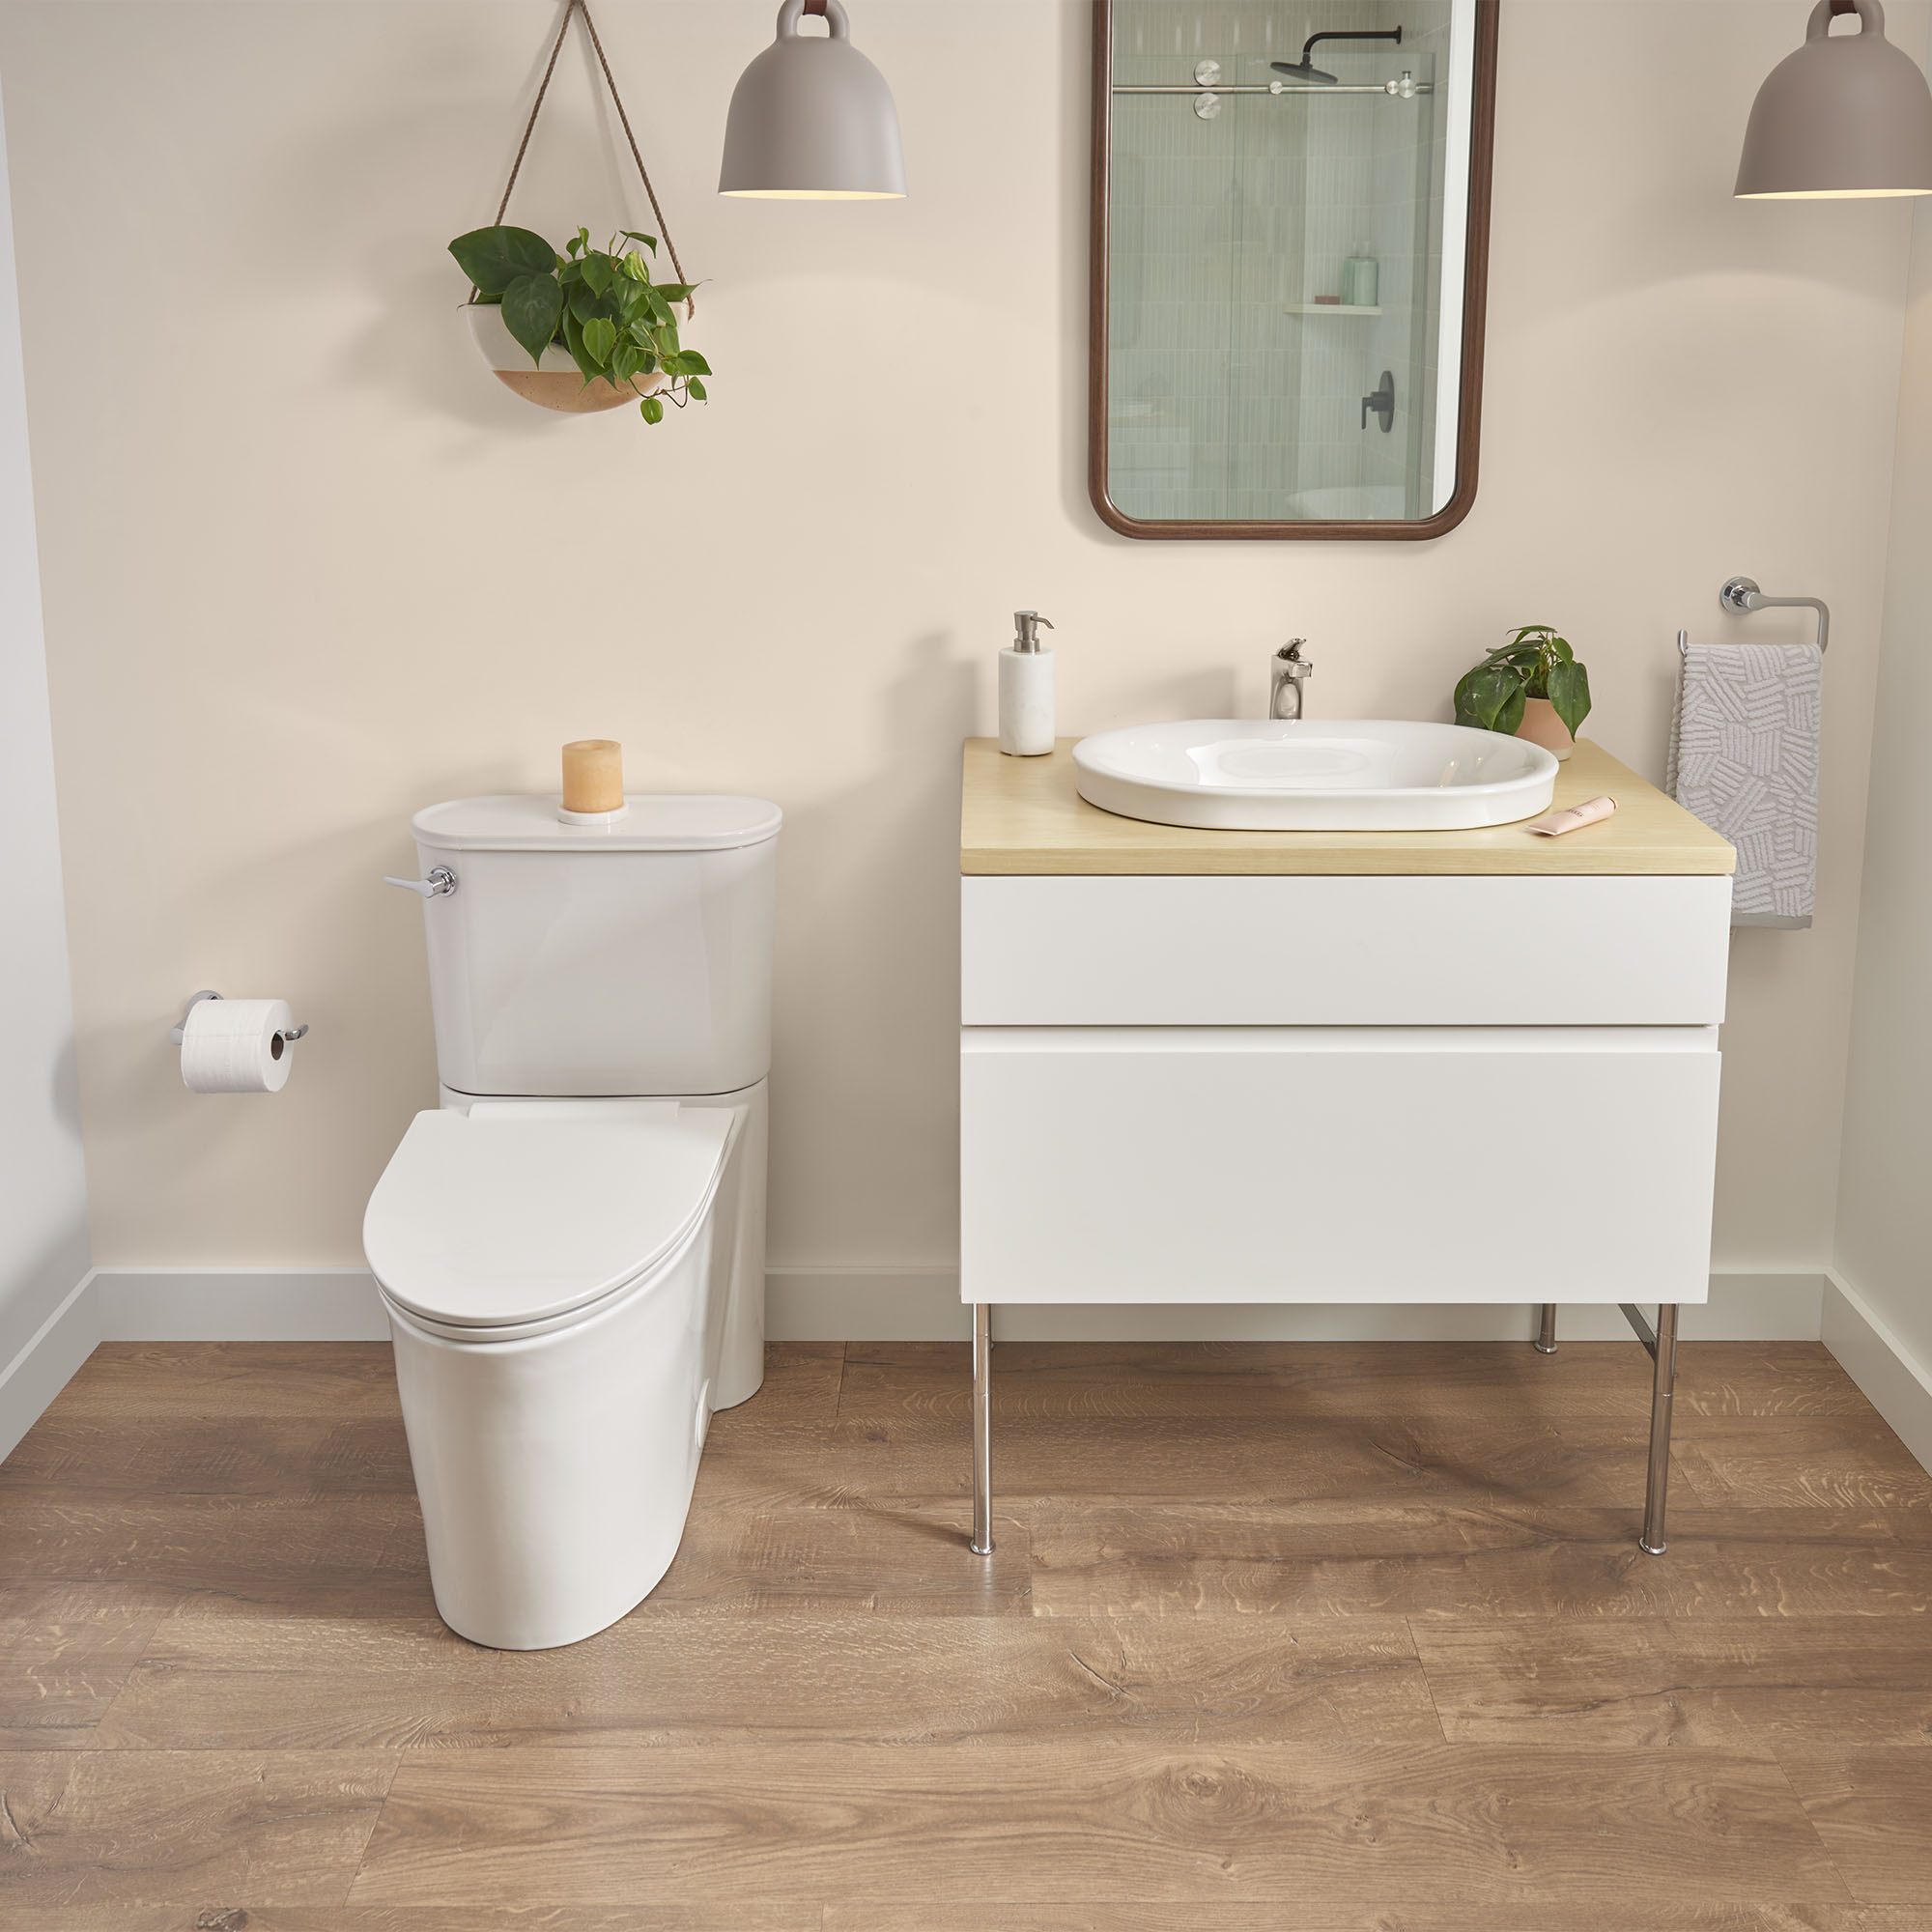 Studio S Concealed Trapway Right Height Elongated Toilet Bowl with Seat